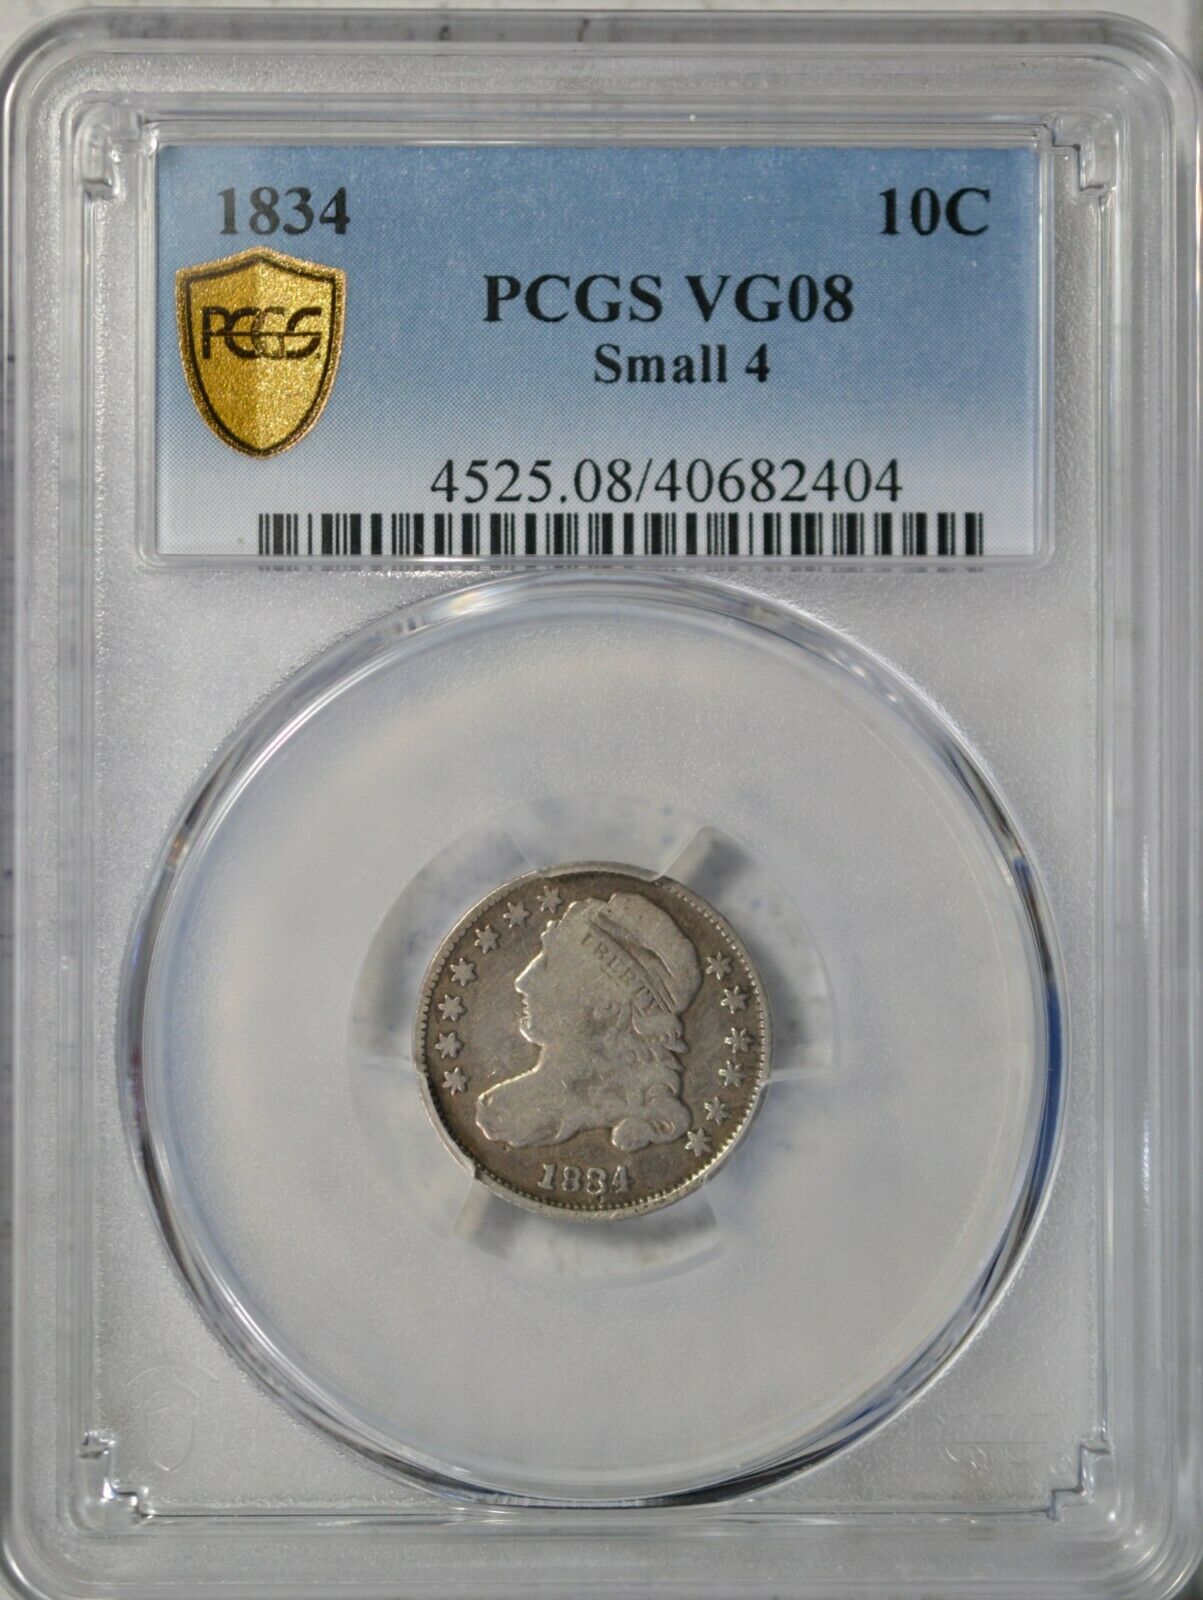 1834 Capped Bust Dime, Pcgs Vg08